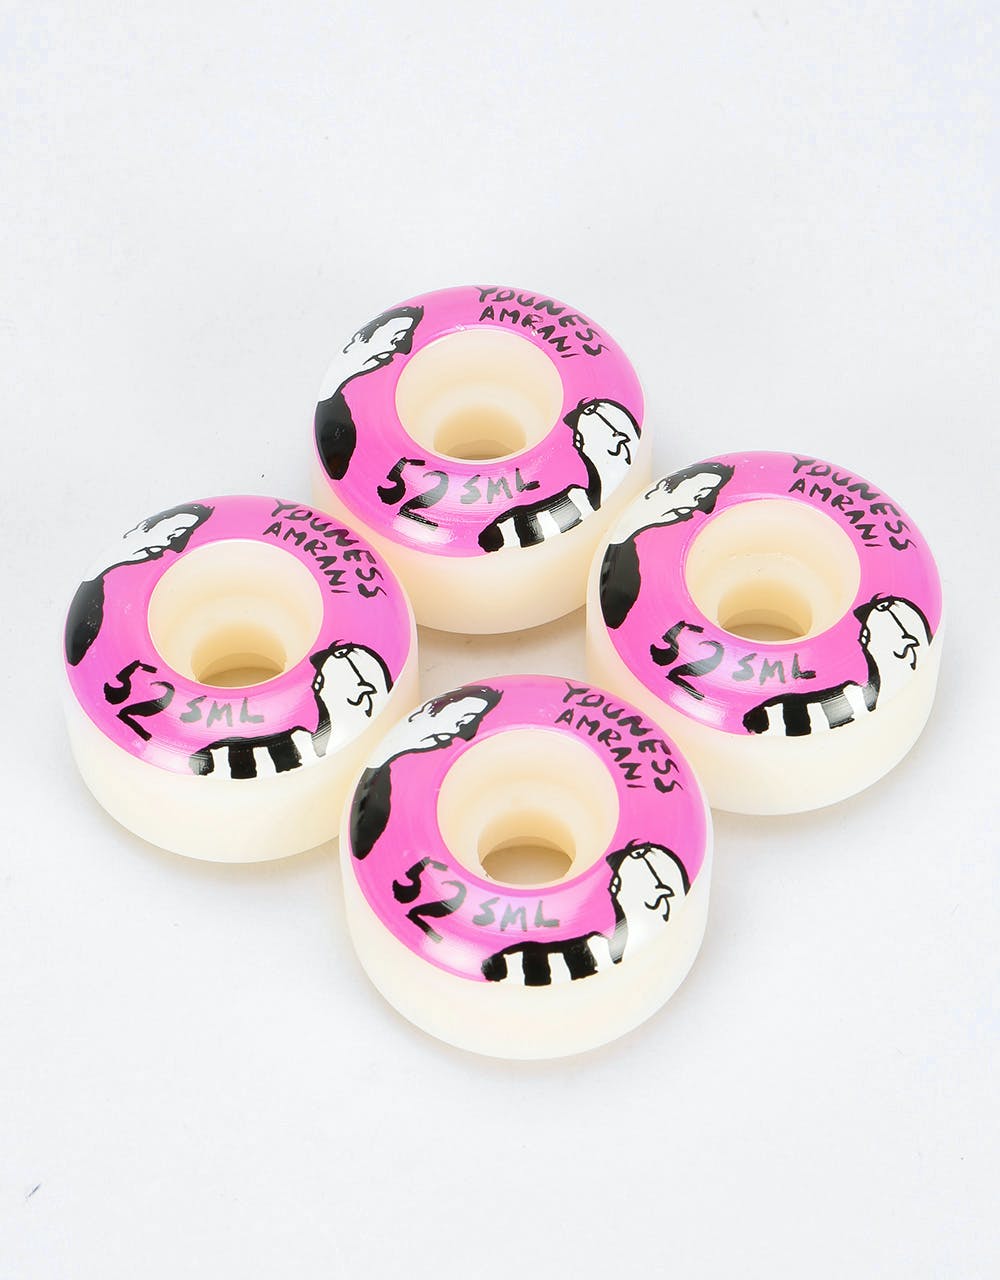 SML Youness Lookers Series OG Wide 99a Skateboard Wheel - 52mm